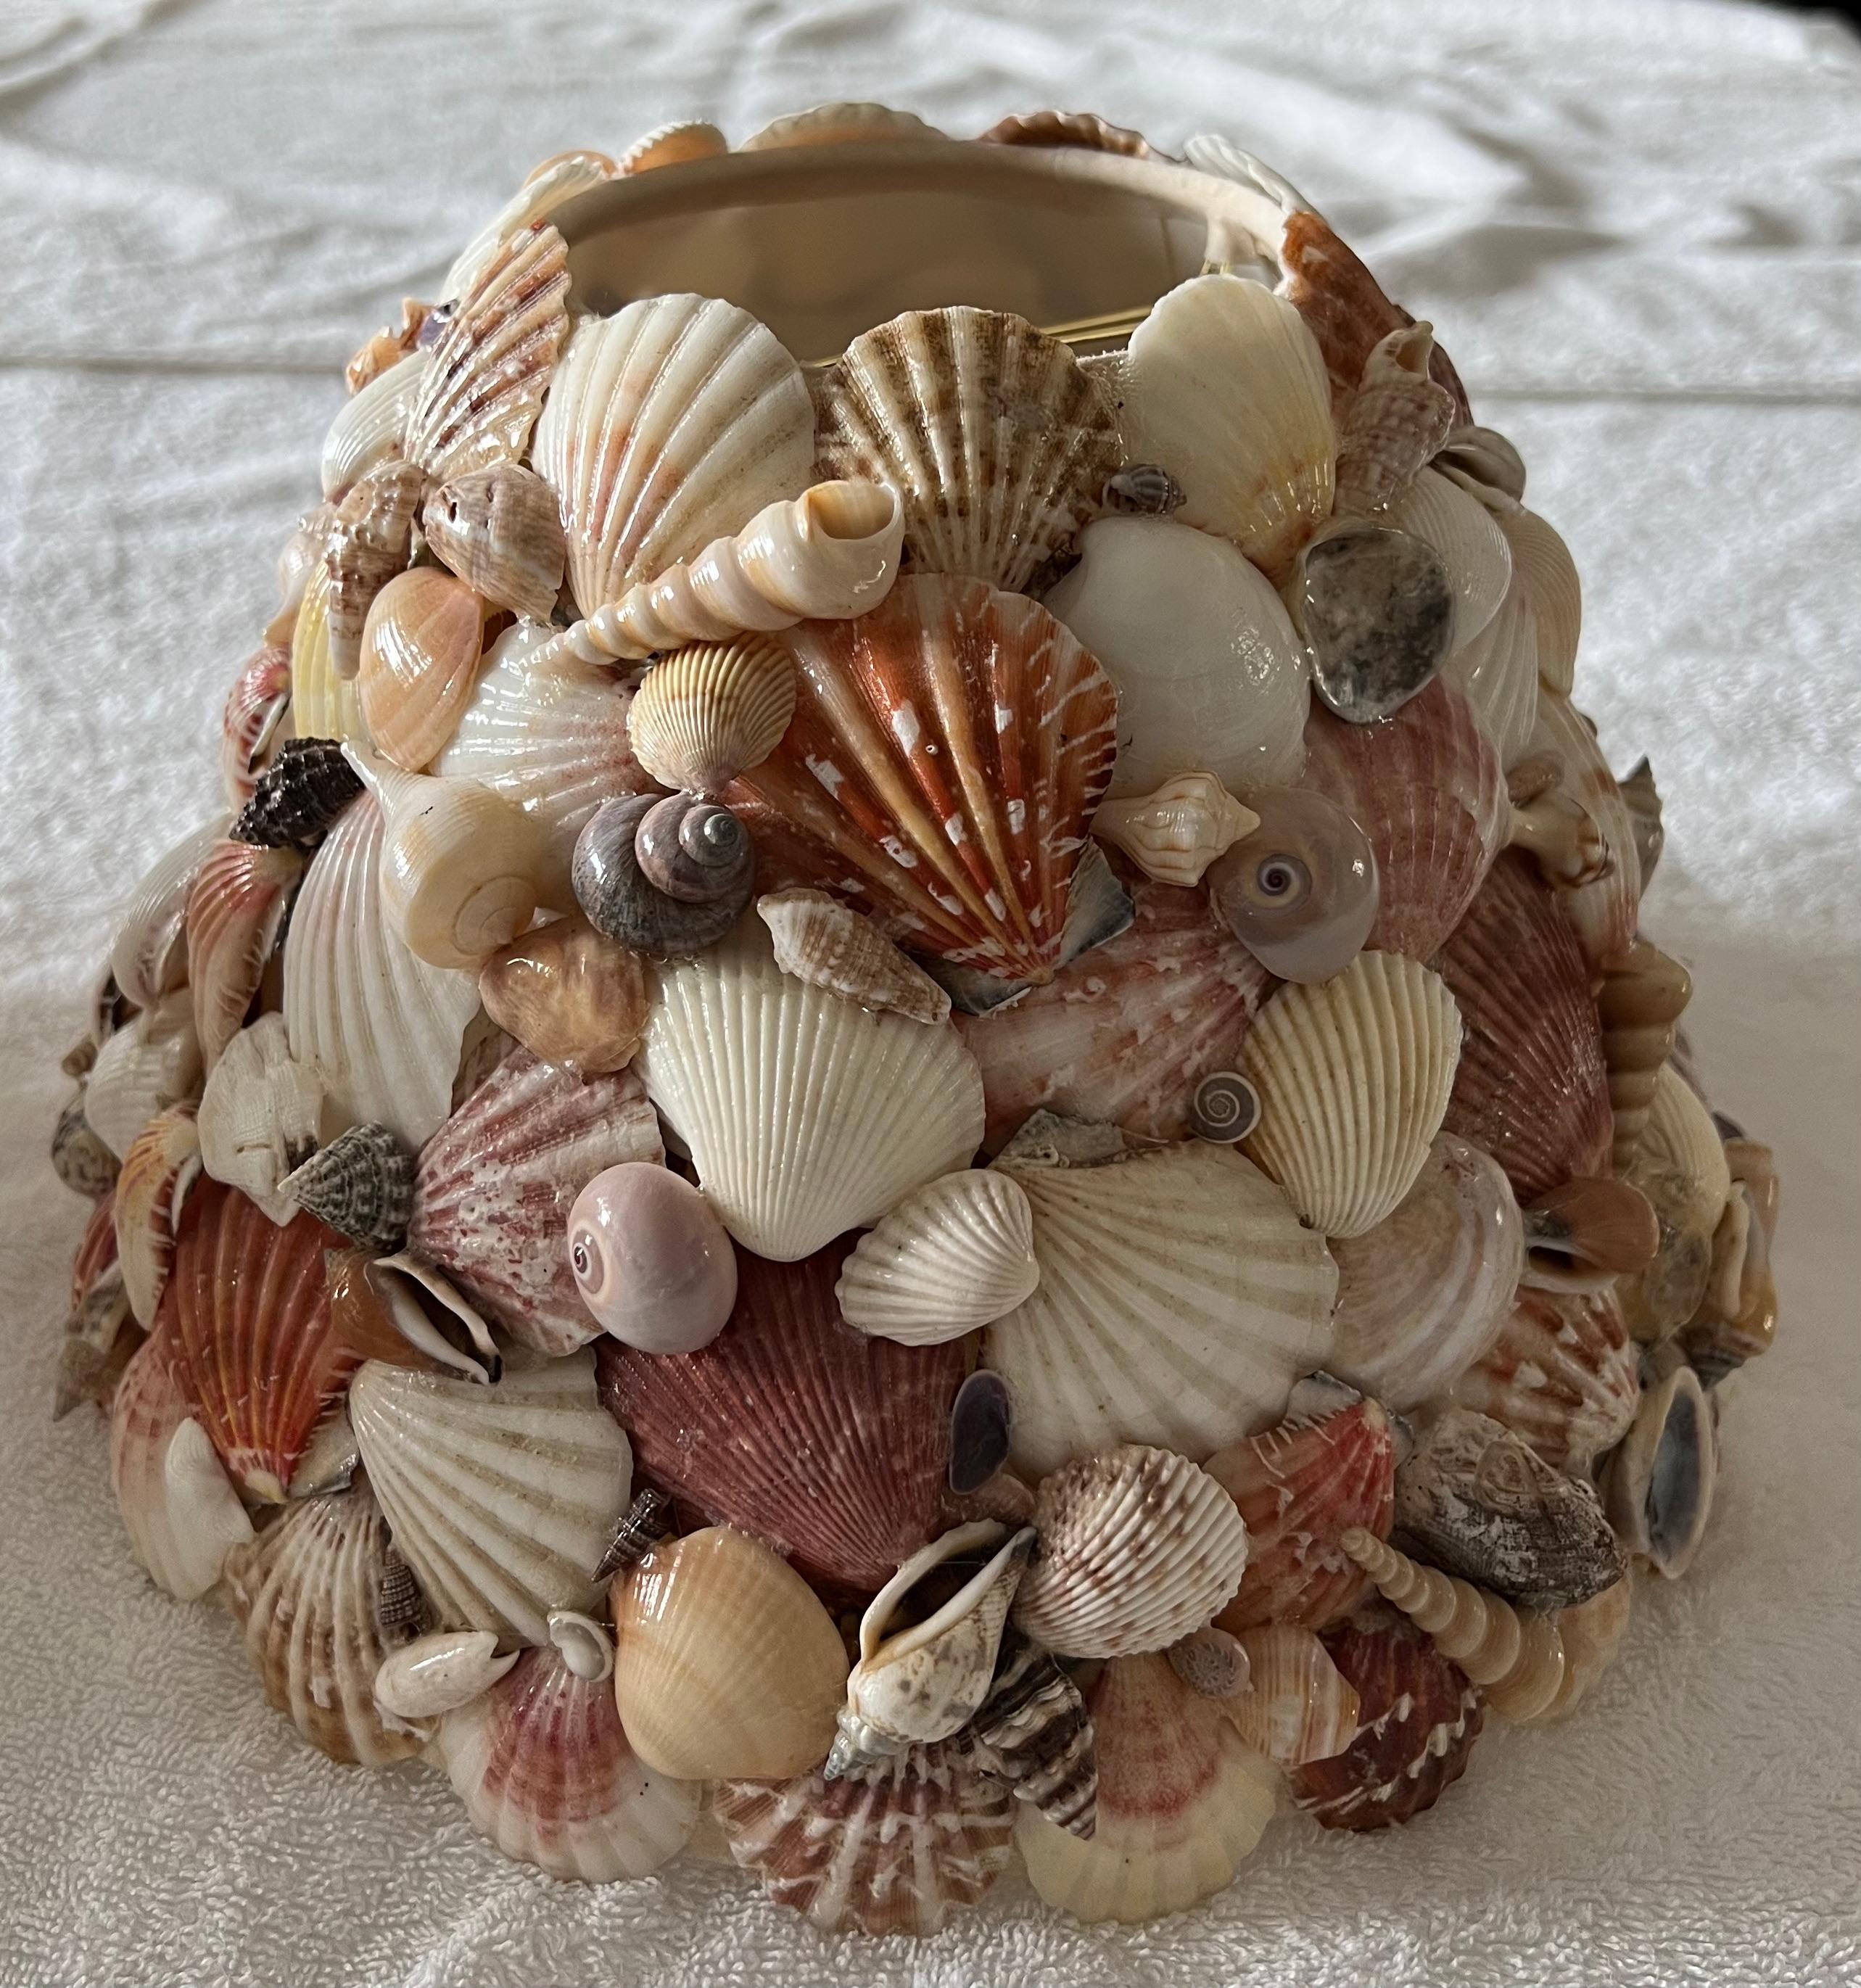 These vintage seashell encrusted lampshades evoke the glamour of Palm Beach and Lyford Cay. Constructed with Atlantic and Caribbean seashells including fan scallops, Scotch bonnets, cockles, cones, conchs, clams, tulips and auger shells, the palette